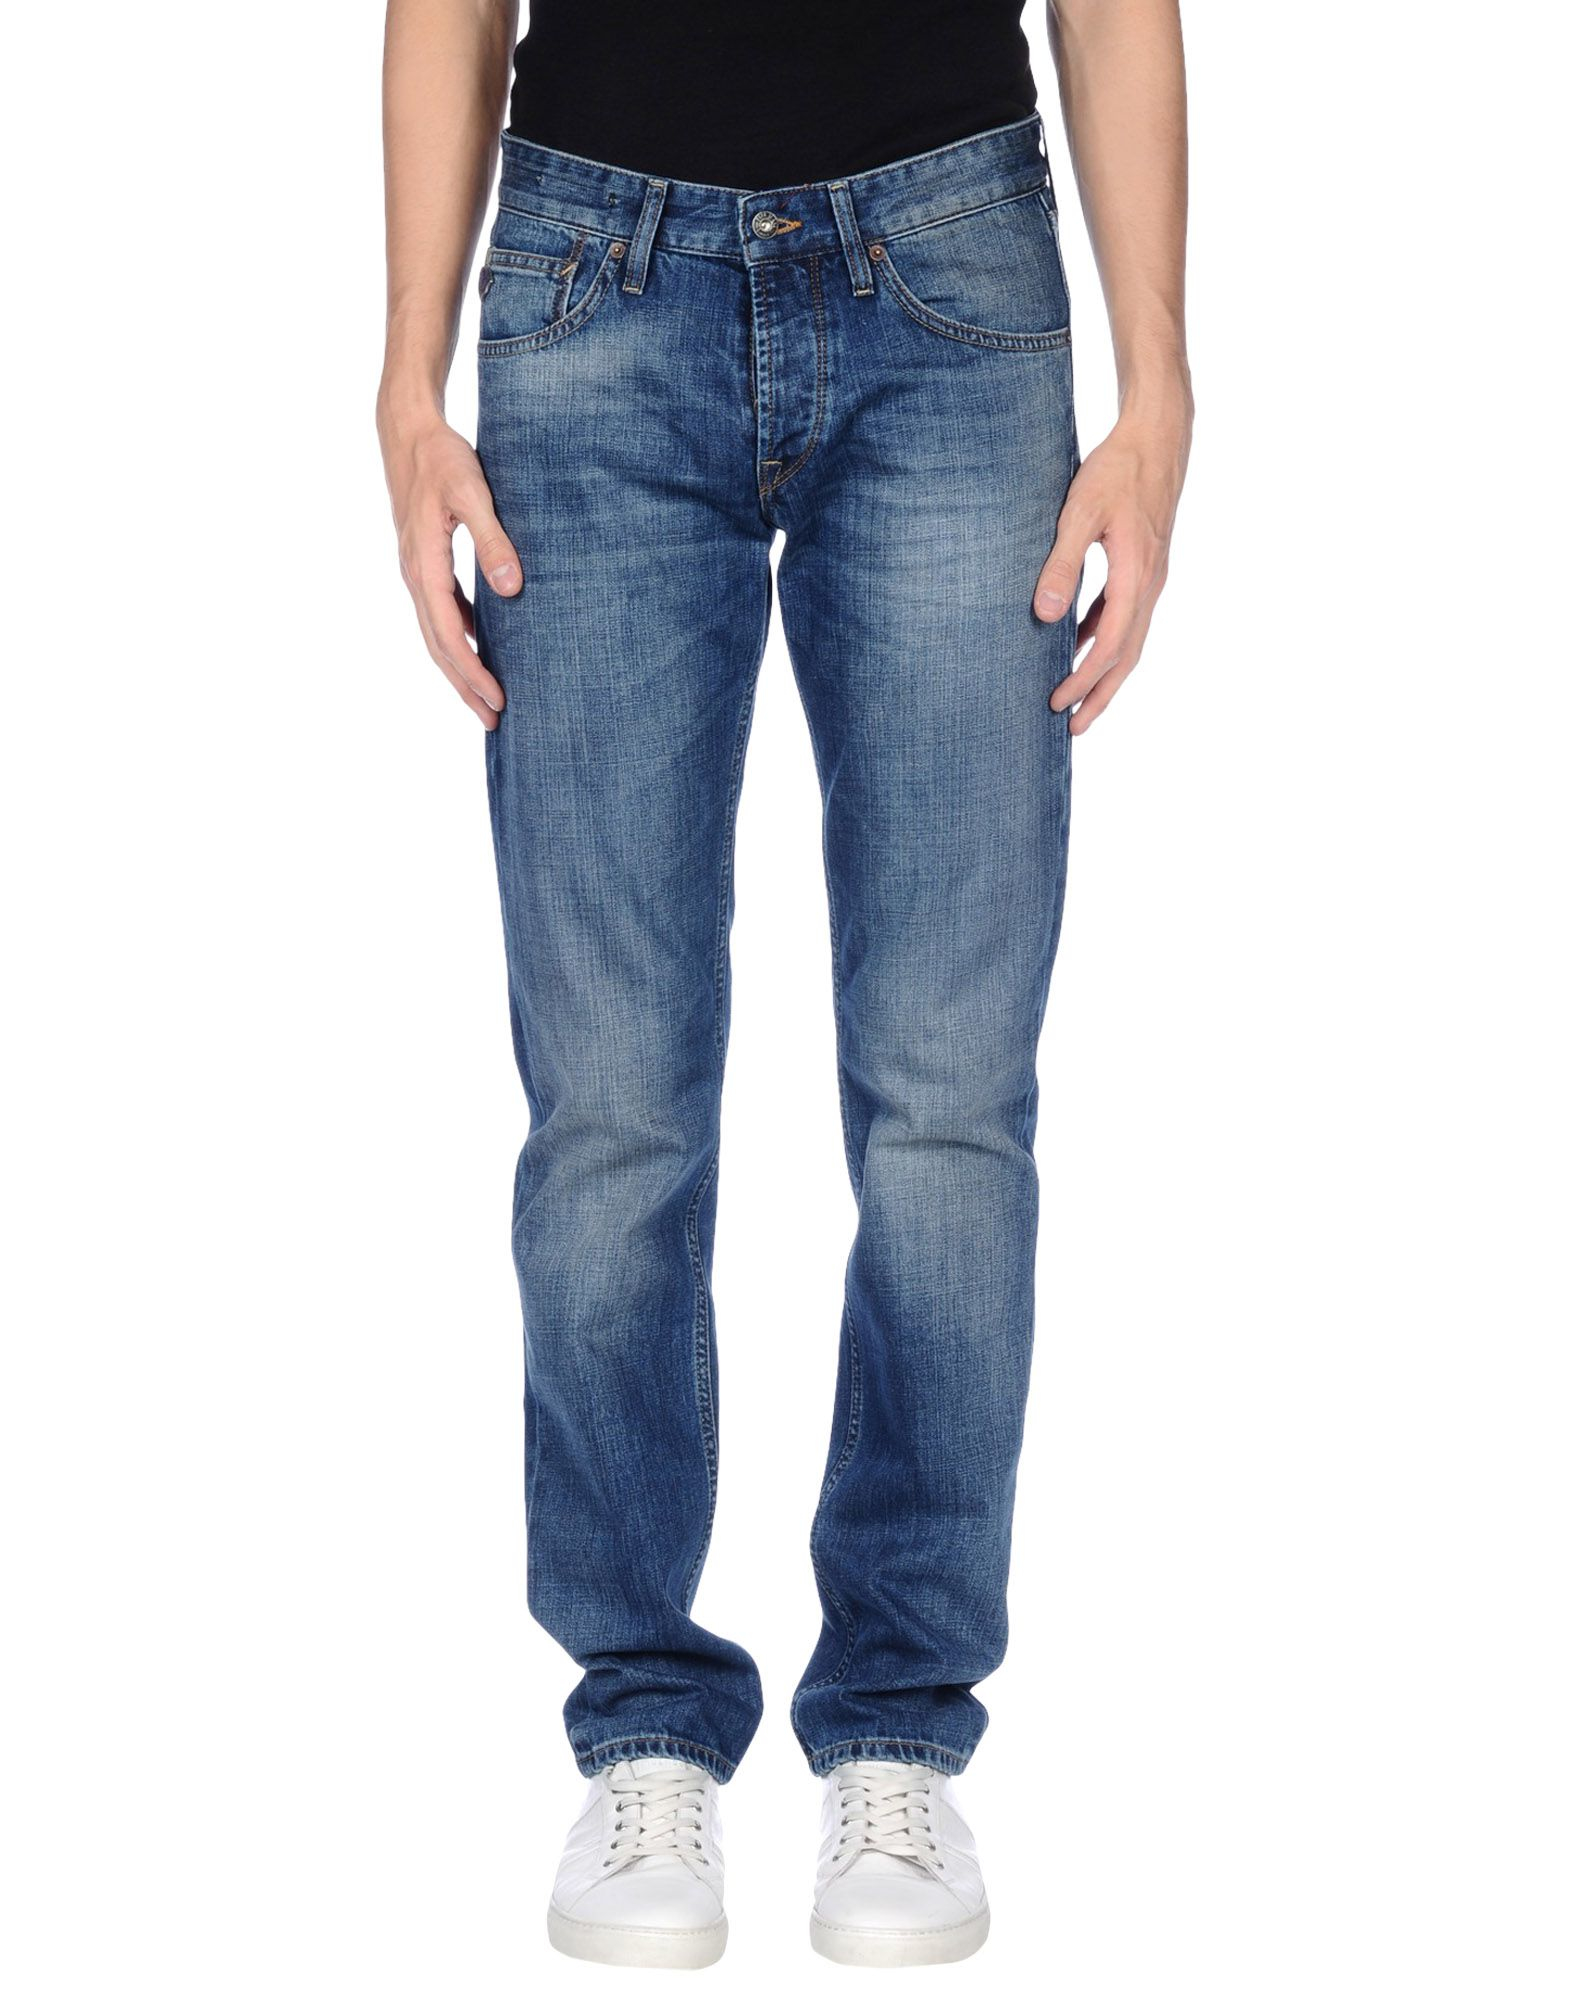 Lyst - Pepe Jeans Denim Trousers in Blue for Men